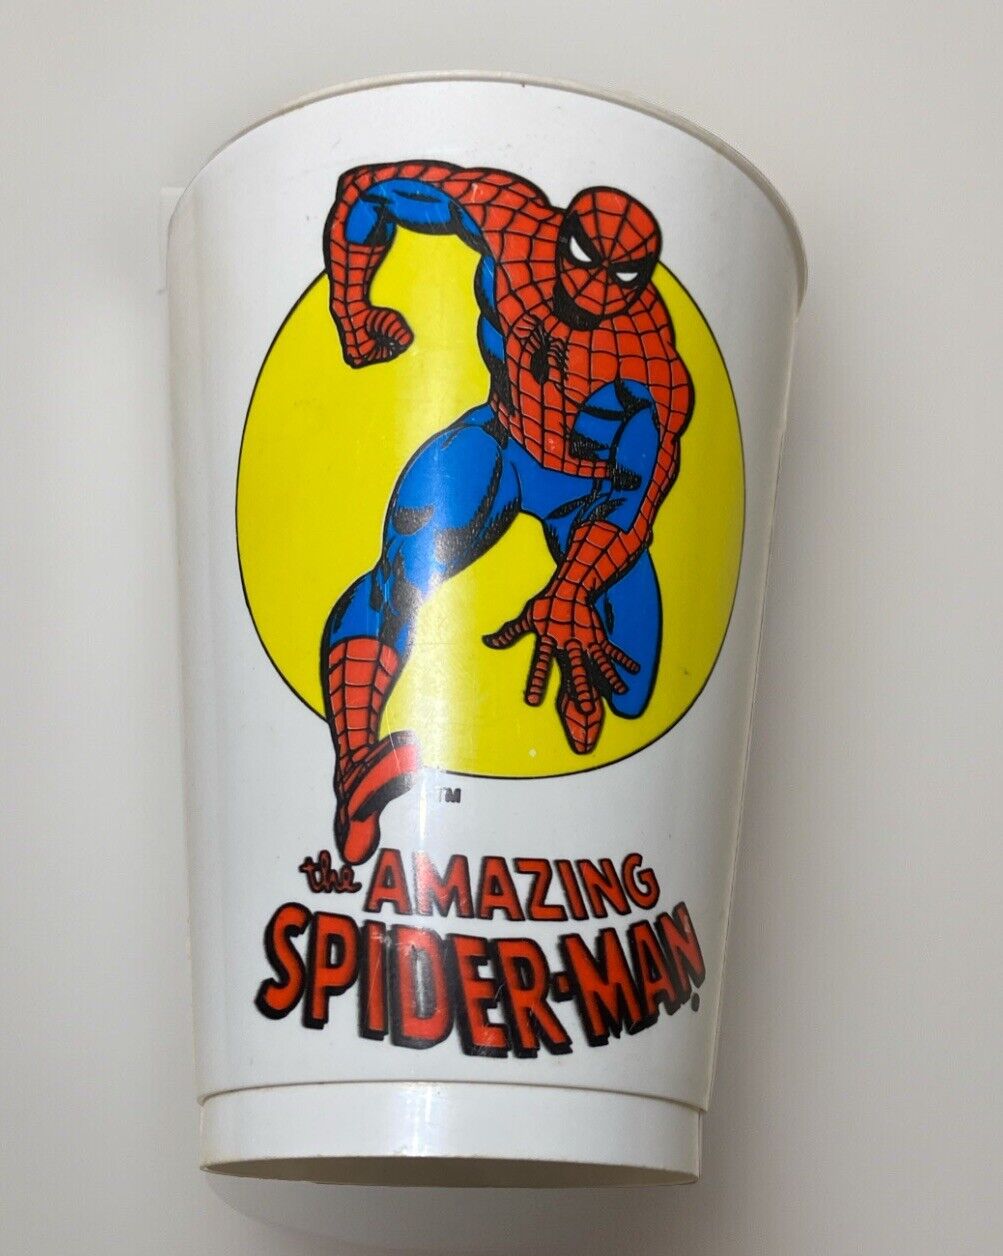 Vintage 1975 Marvel THE AMAZING SPIDER - MAN Plastic Cup Koolee The Refreshment